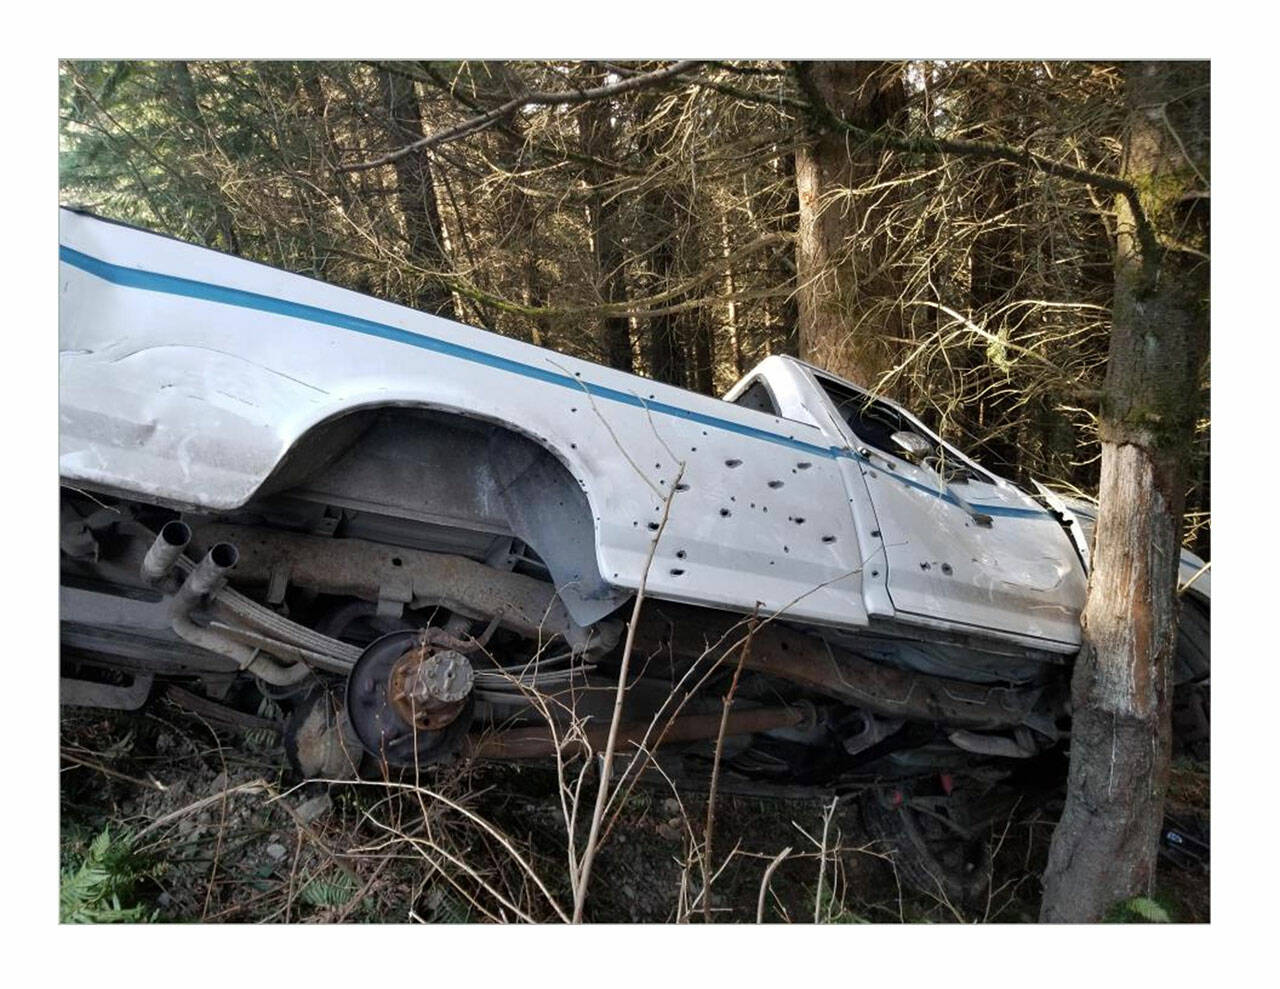 (Photo Courtesy Eric Seidenberger) Eric Seidenberger’s truck, as it was found in Wilkeson by the Puget Sound Auto Theft Task Force.